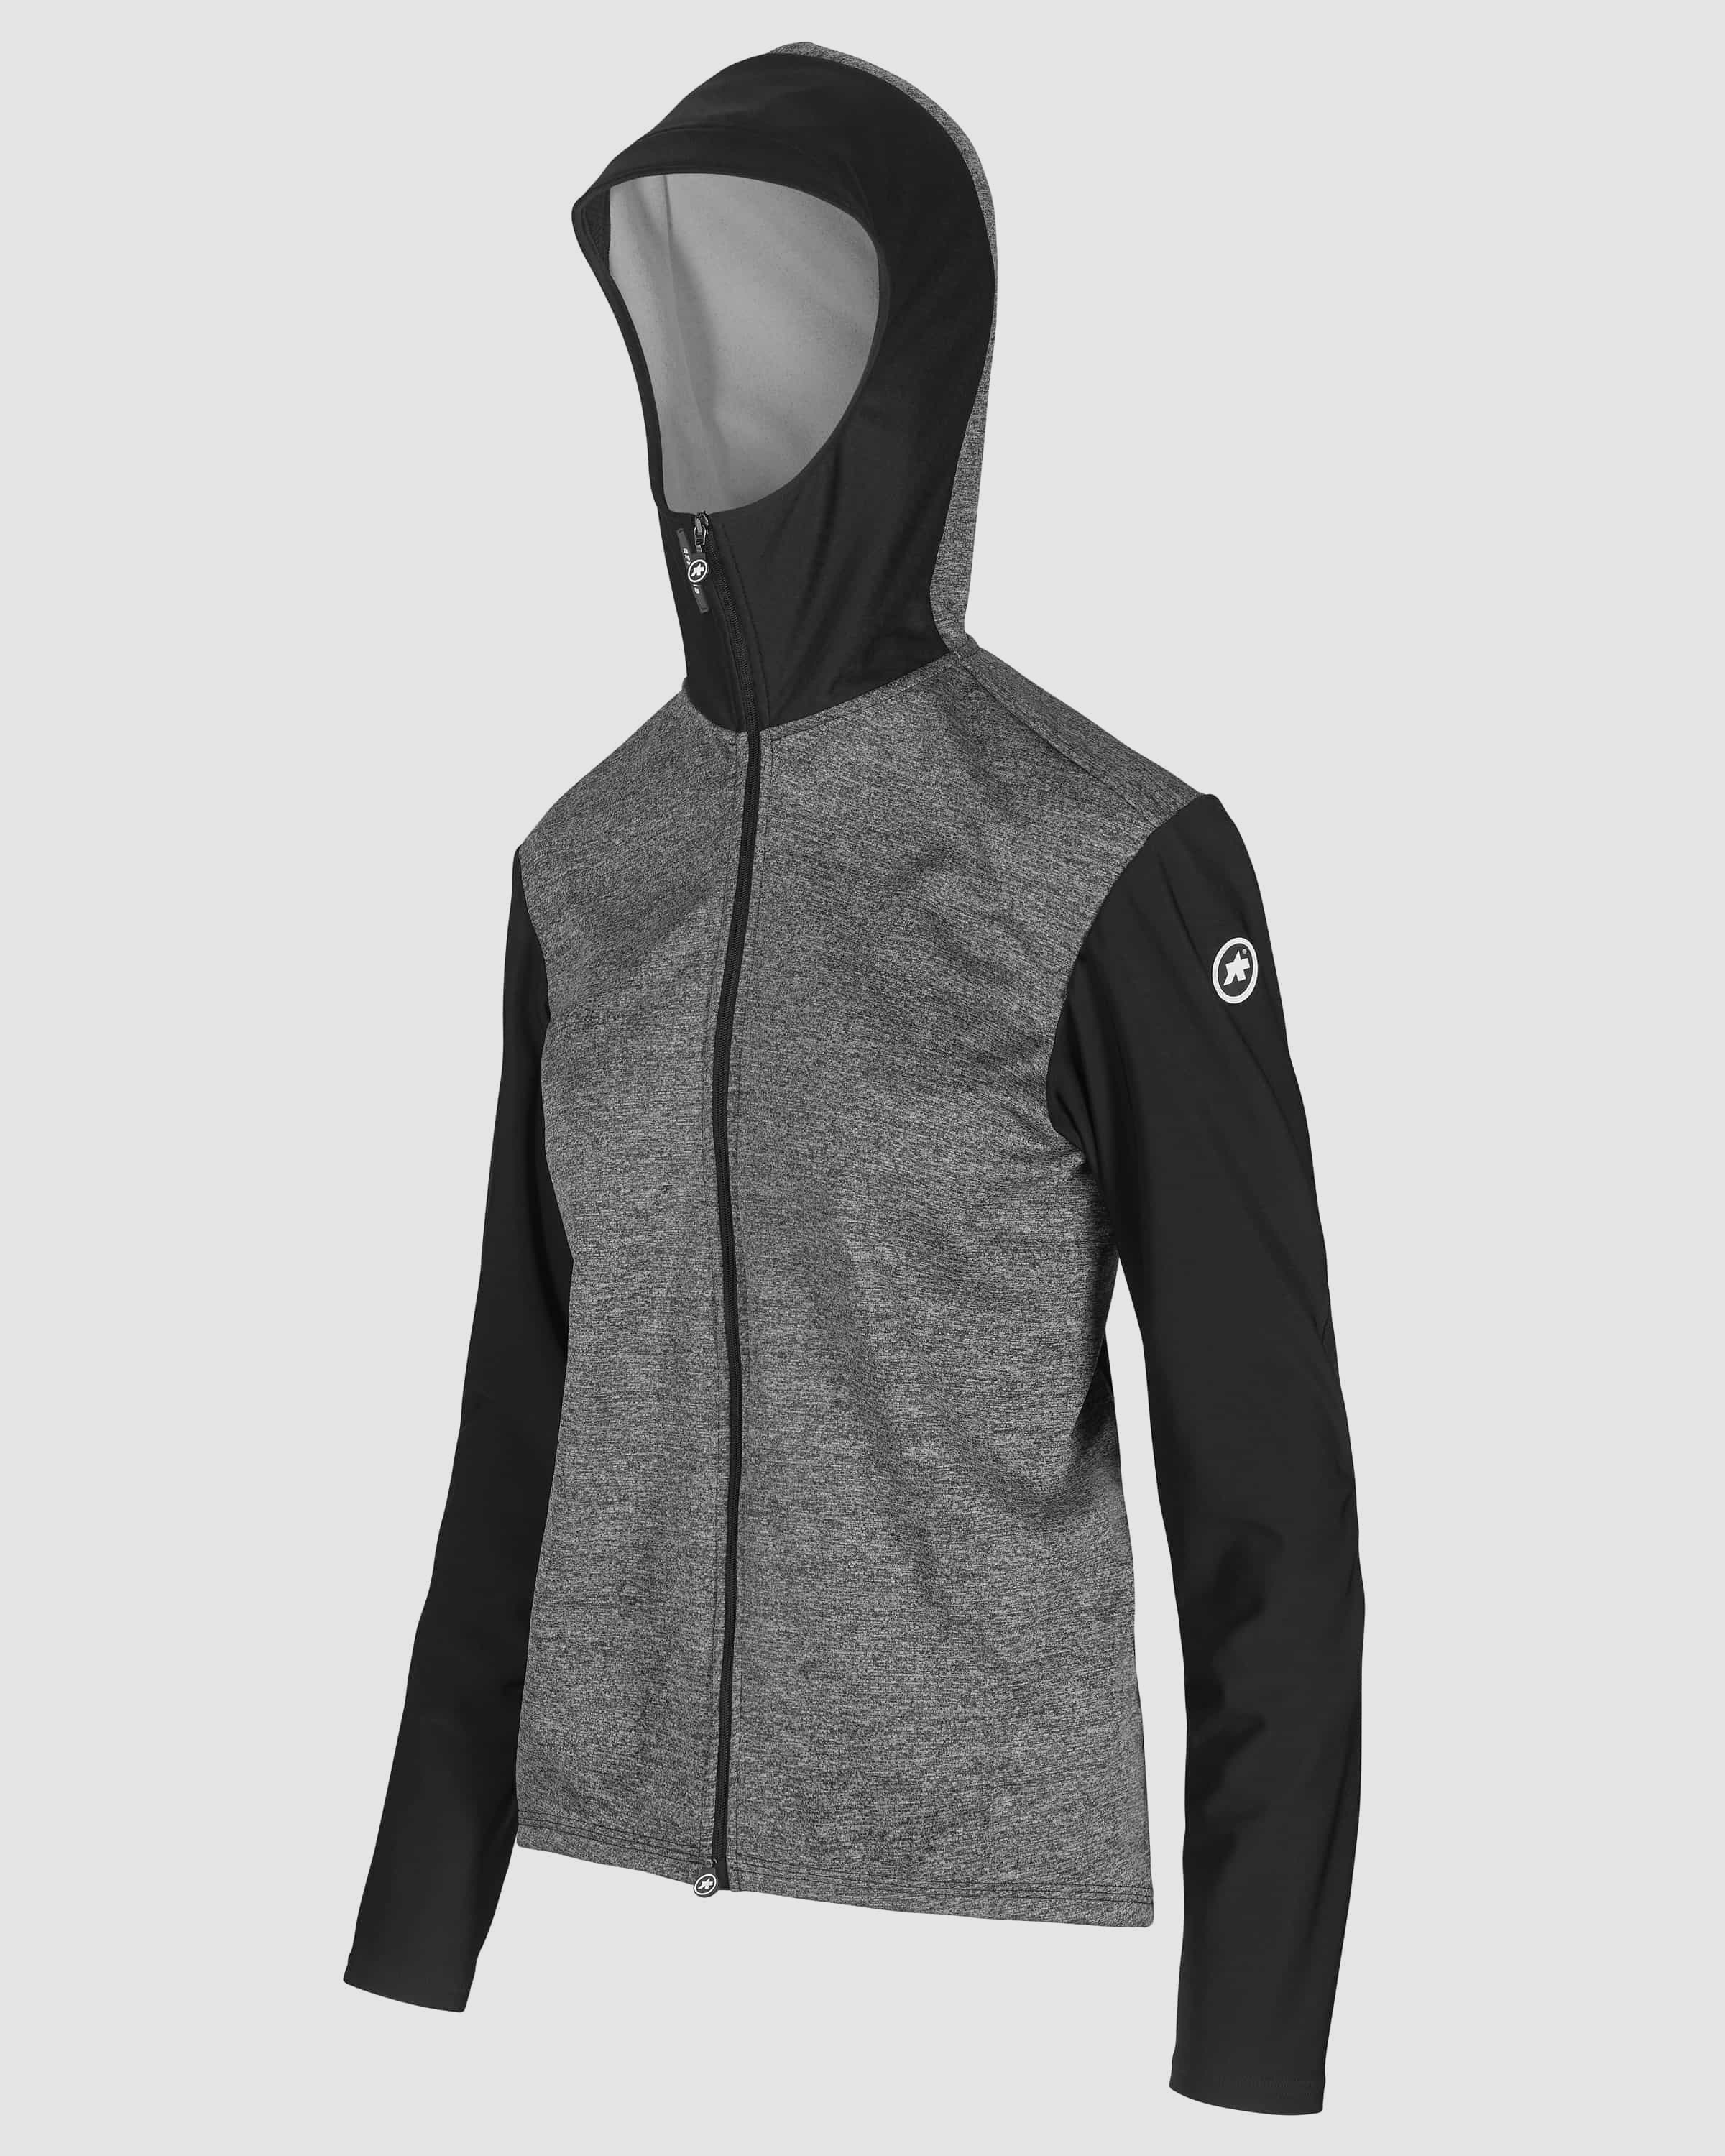 TRAIL Women's Spring Fall Jacket - ASSOS Of Switzerland - Official Outlet